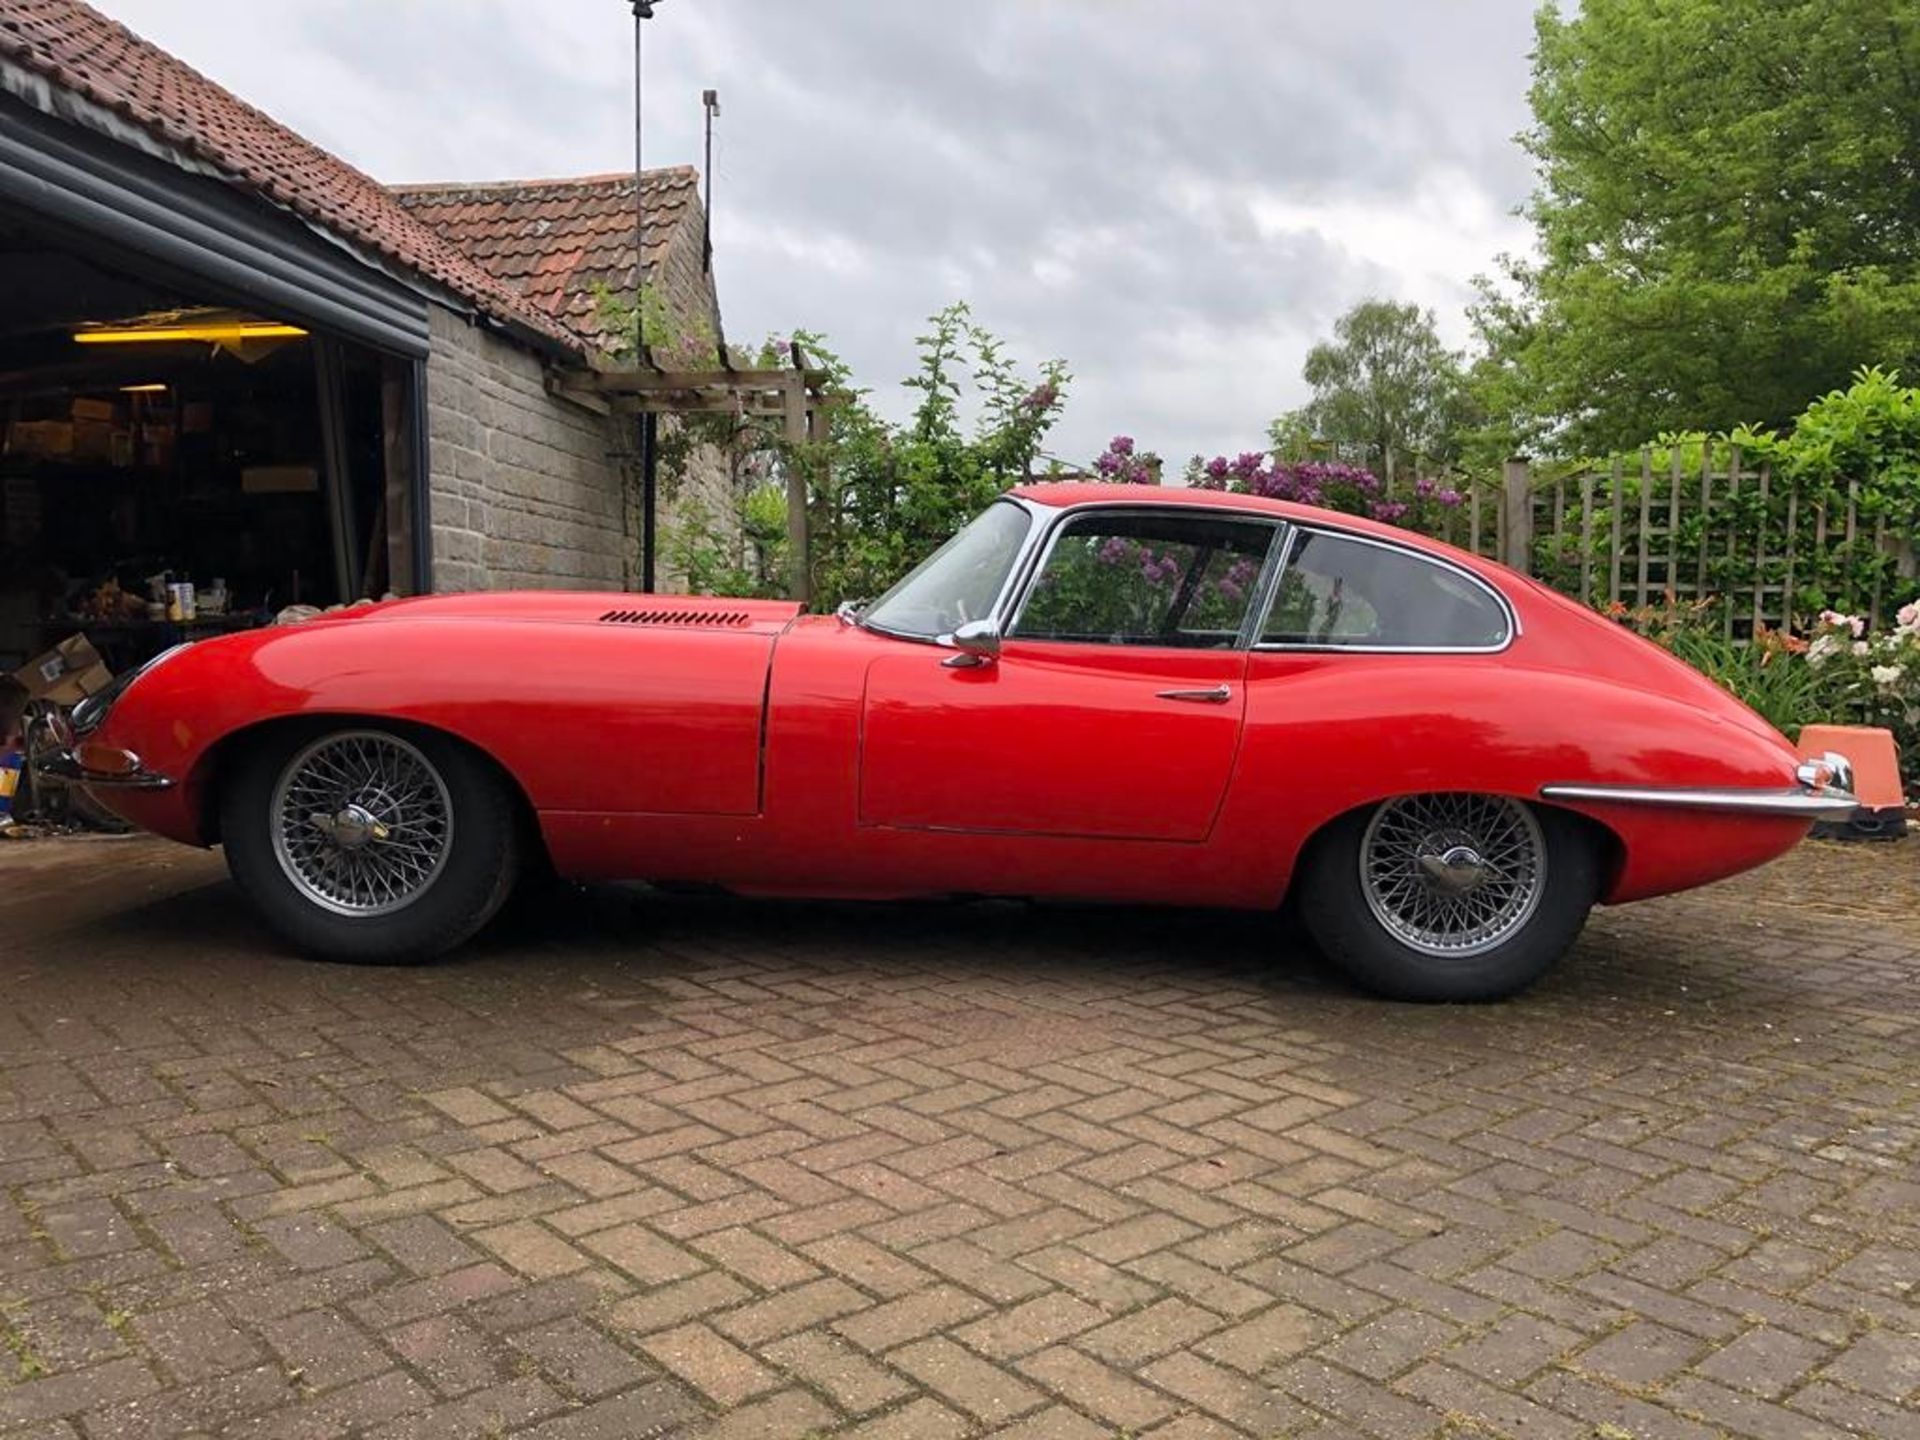 1962 Jaguar E-Type 3.8 Fixed Head Coupé Registration number 297 HBF Chassis number 860773 Engine - Image 65 of 160